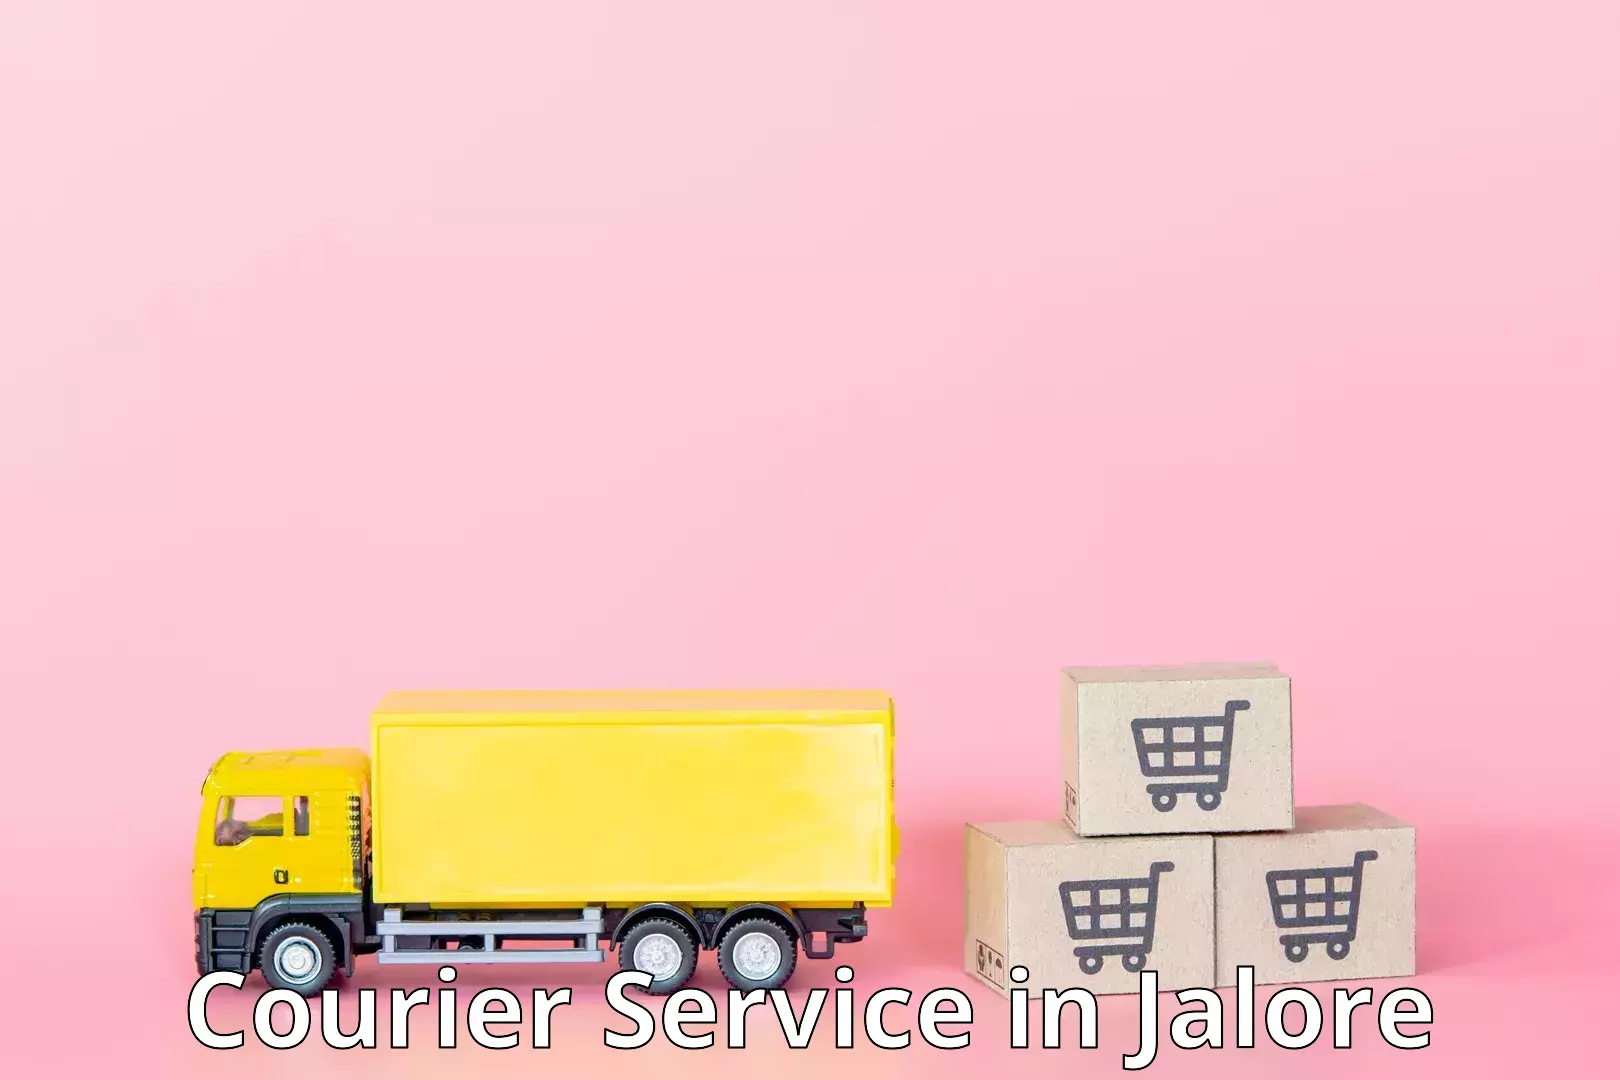 Courier membership in Jalore